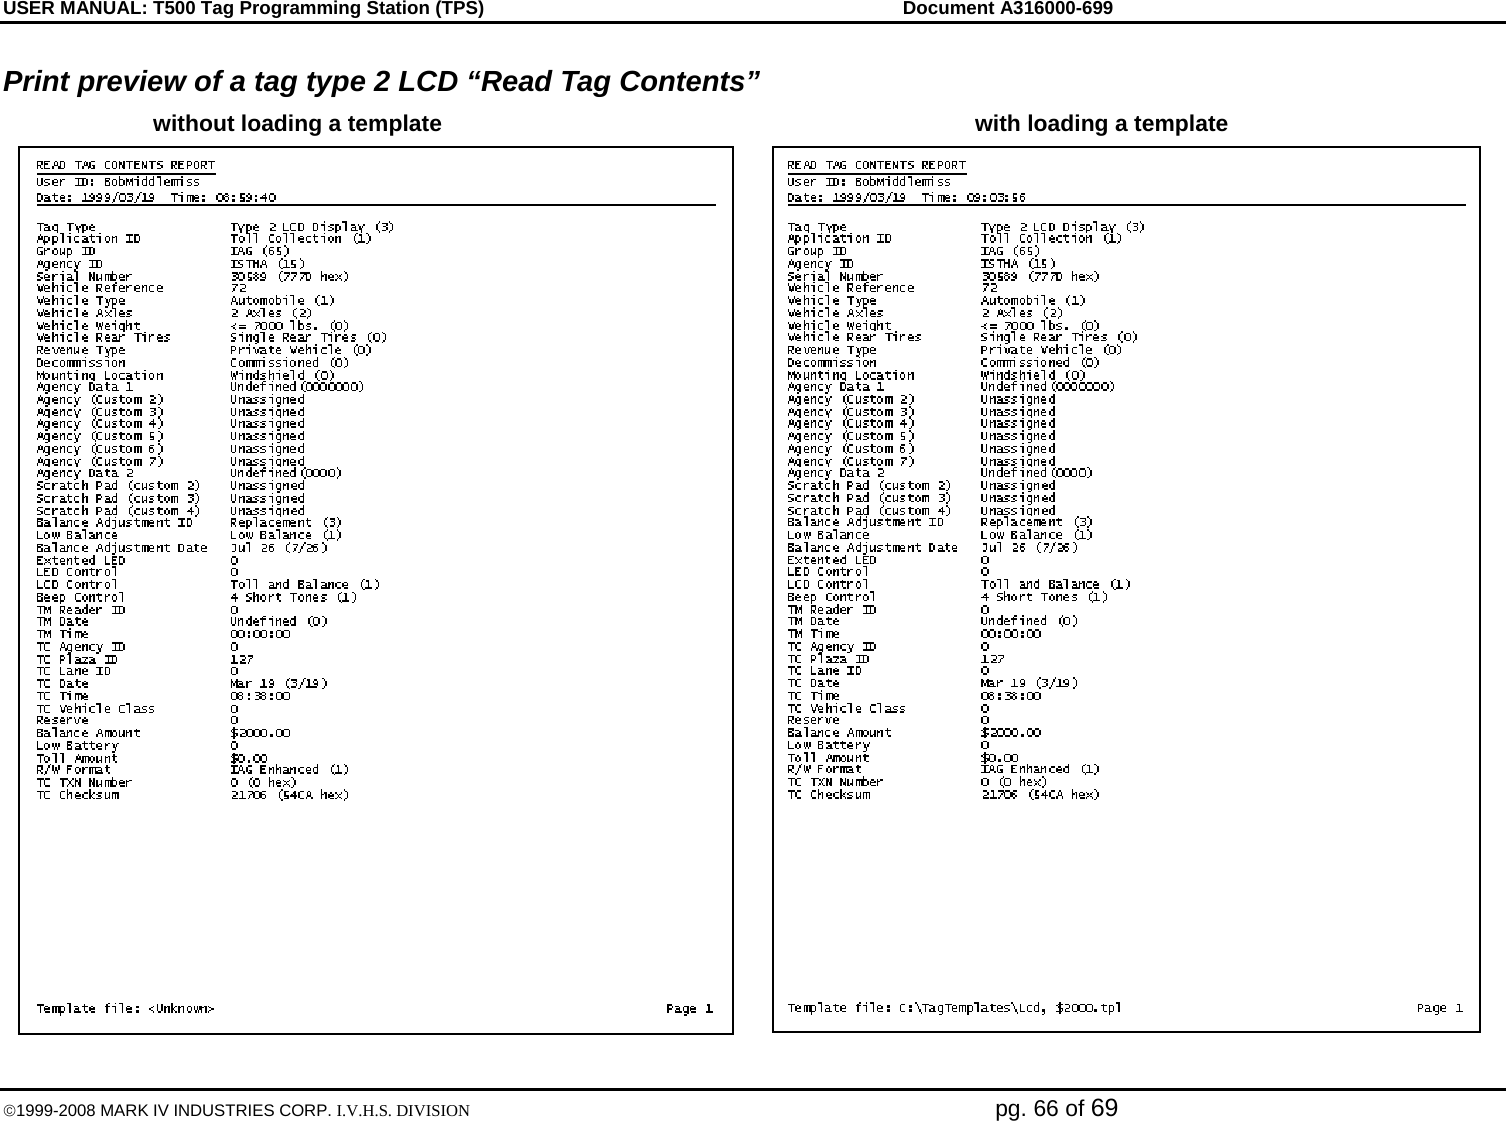 USER MANUAL: T500 Tag Programming Station (TPS)     Document A316000-699  ©1999-2008 MARK IV INDUSTRIES CORP. I.V.H.S. DIVISION   pg. 66 of 69 Print preview of a tag type 2 LCD “Read Tag Contents”    without loading a template    with loading a template  